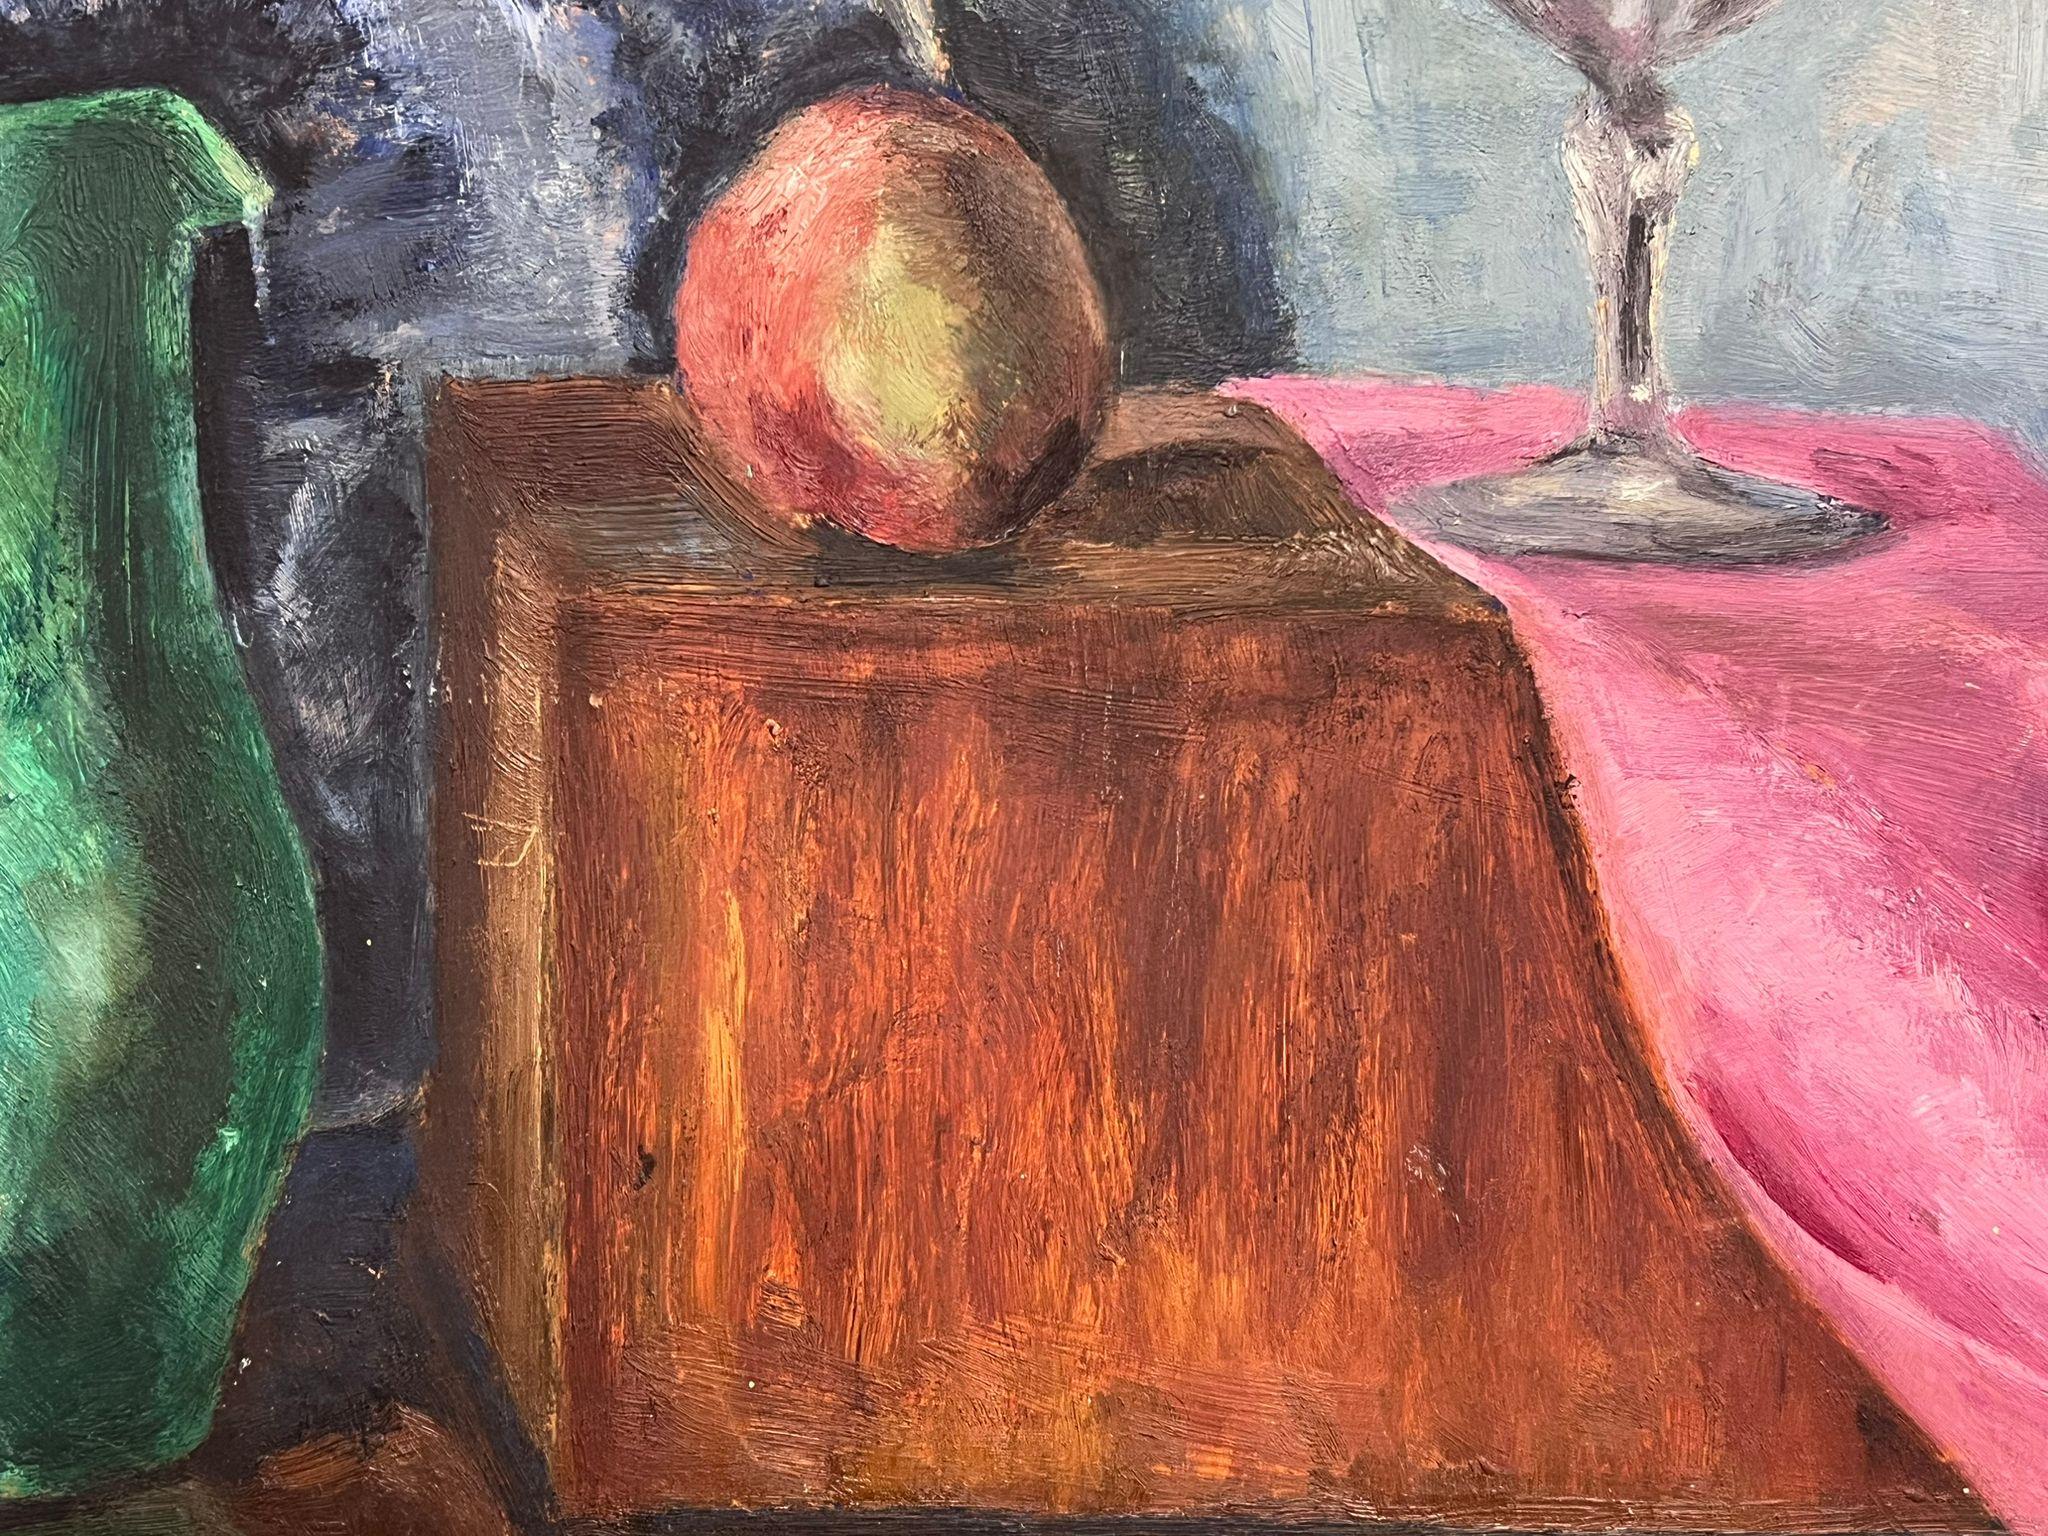 Mid 20th Century French Modernist Still Life of Objects  - Surrealist Painting by GENEVIEVE ZONDERVAN (1922-2013)